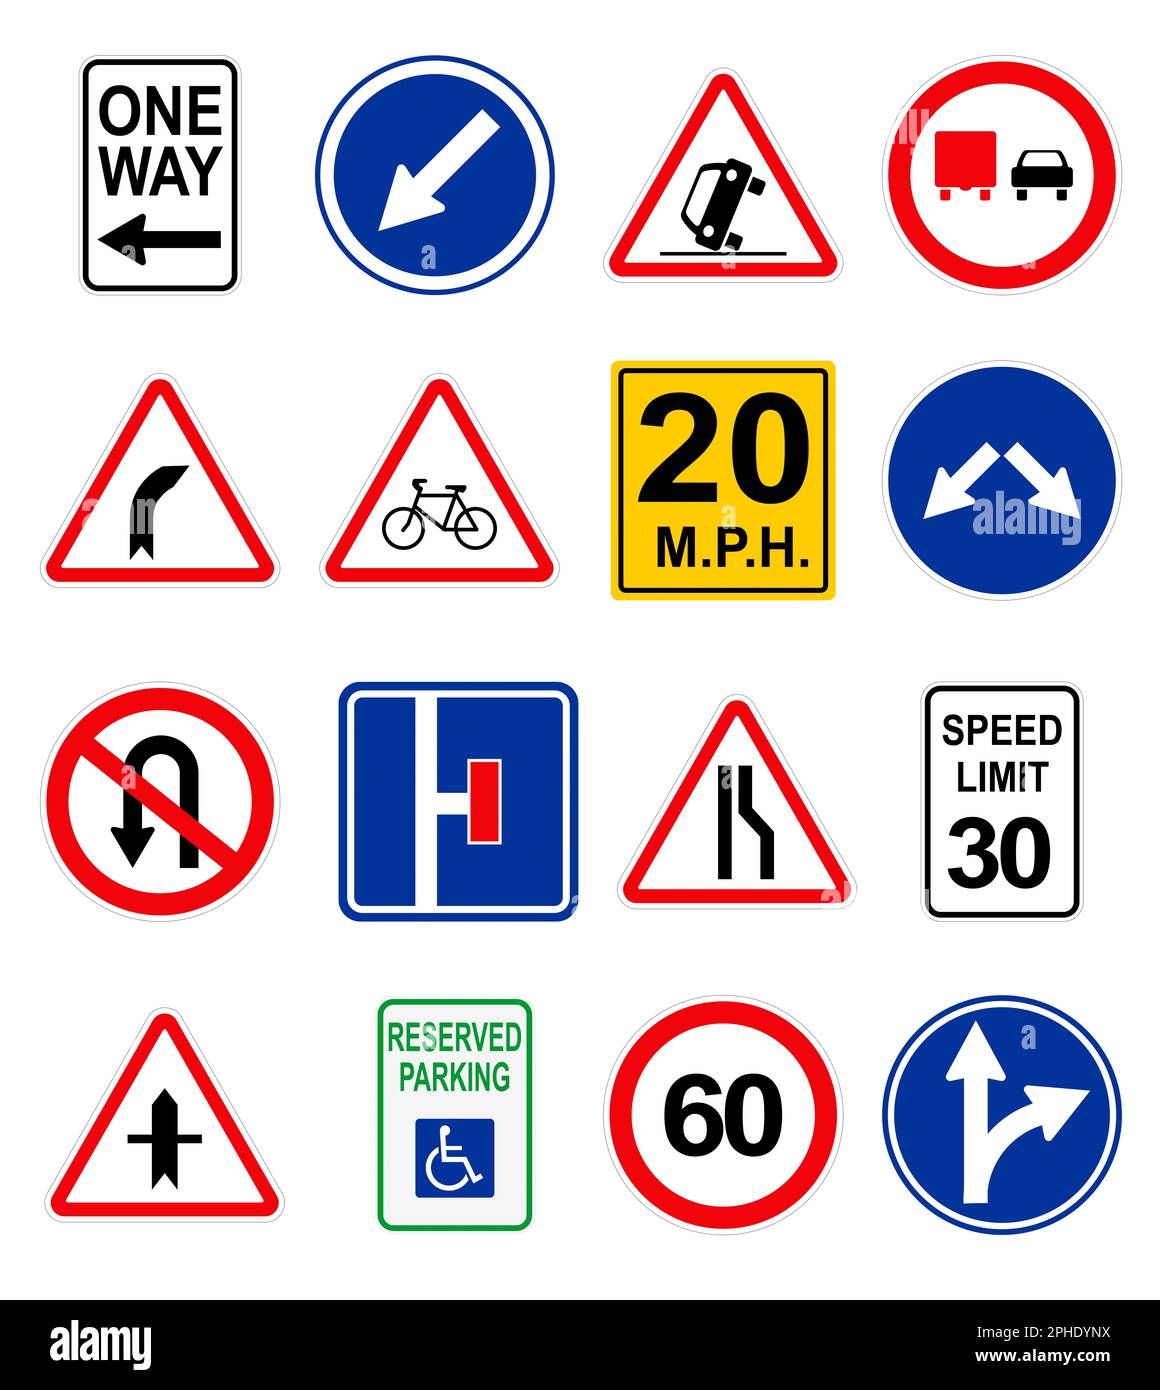 Set with different traffic signs on white background. Illustration Stock Photo